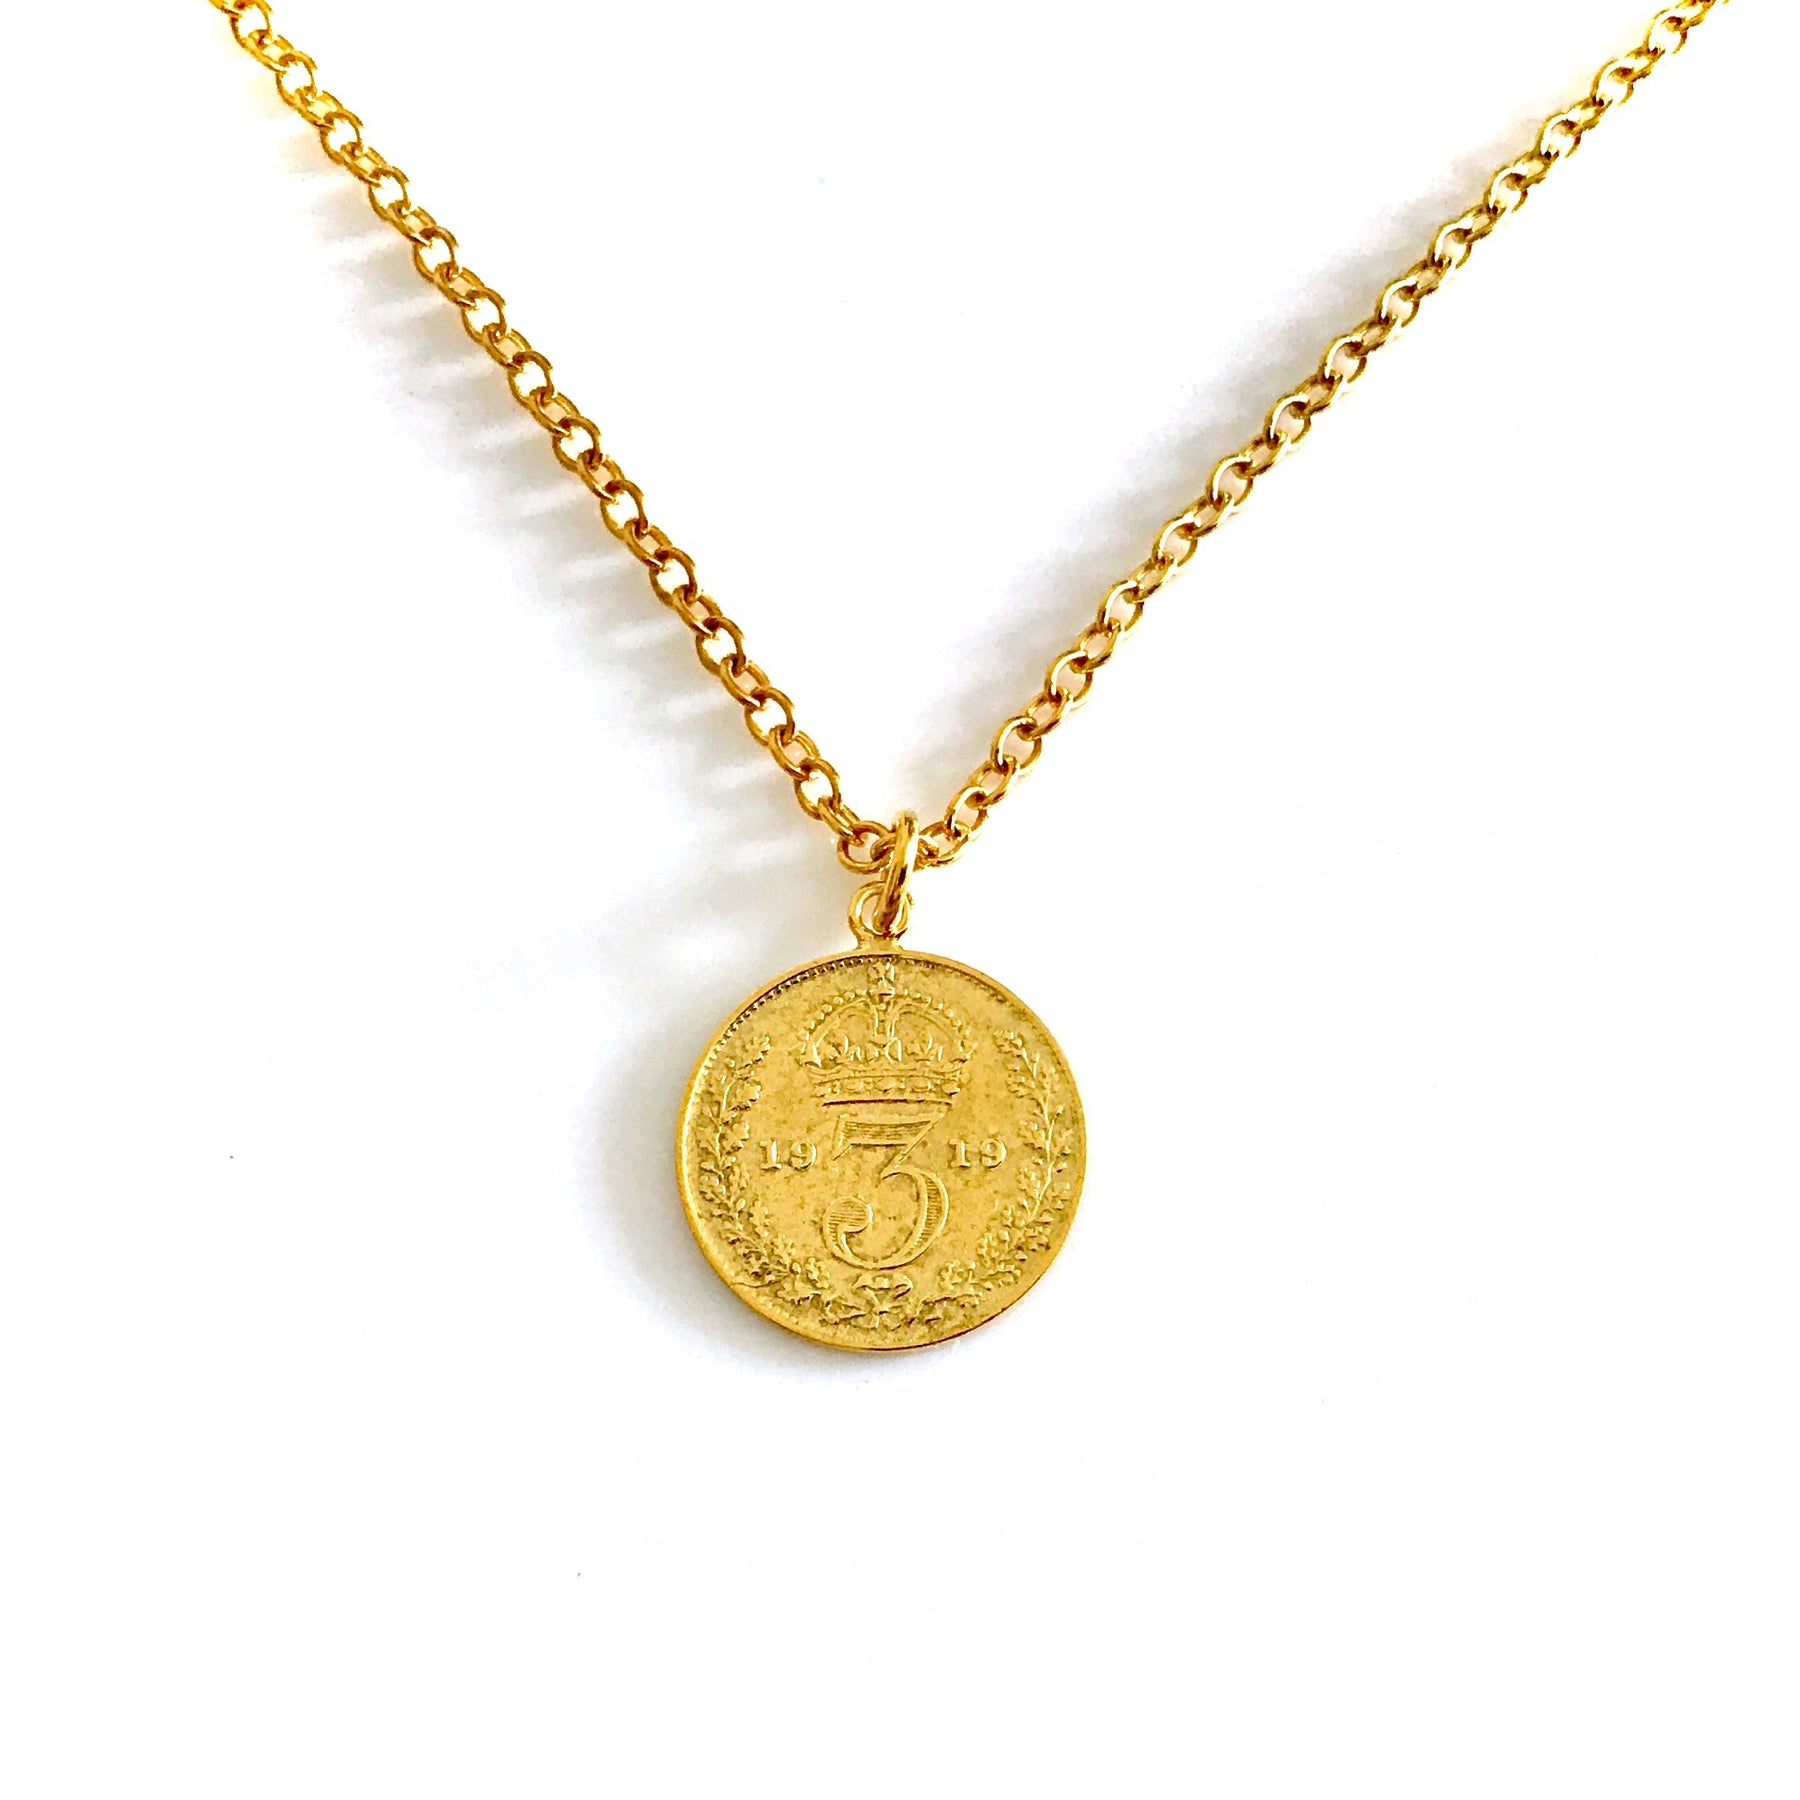 A gold coin necklace featuring an old British design